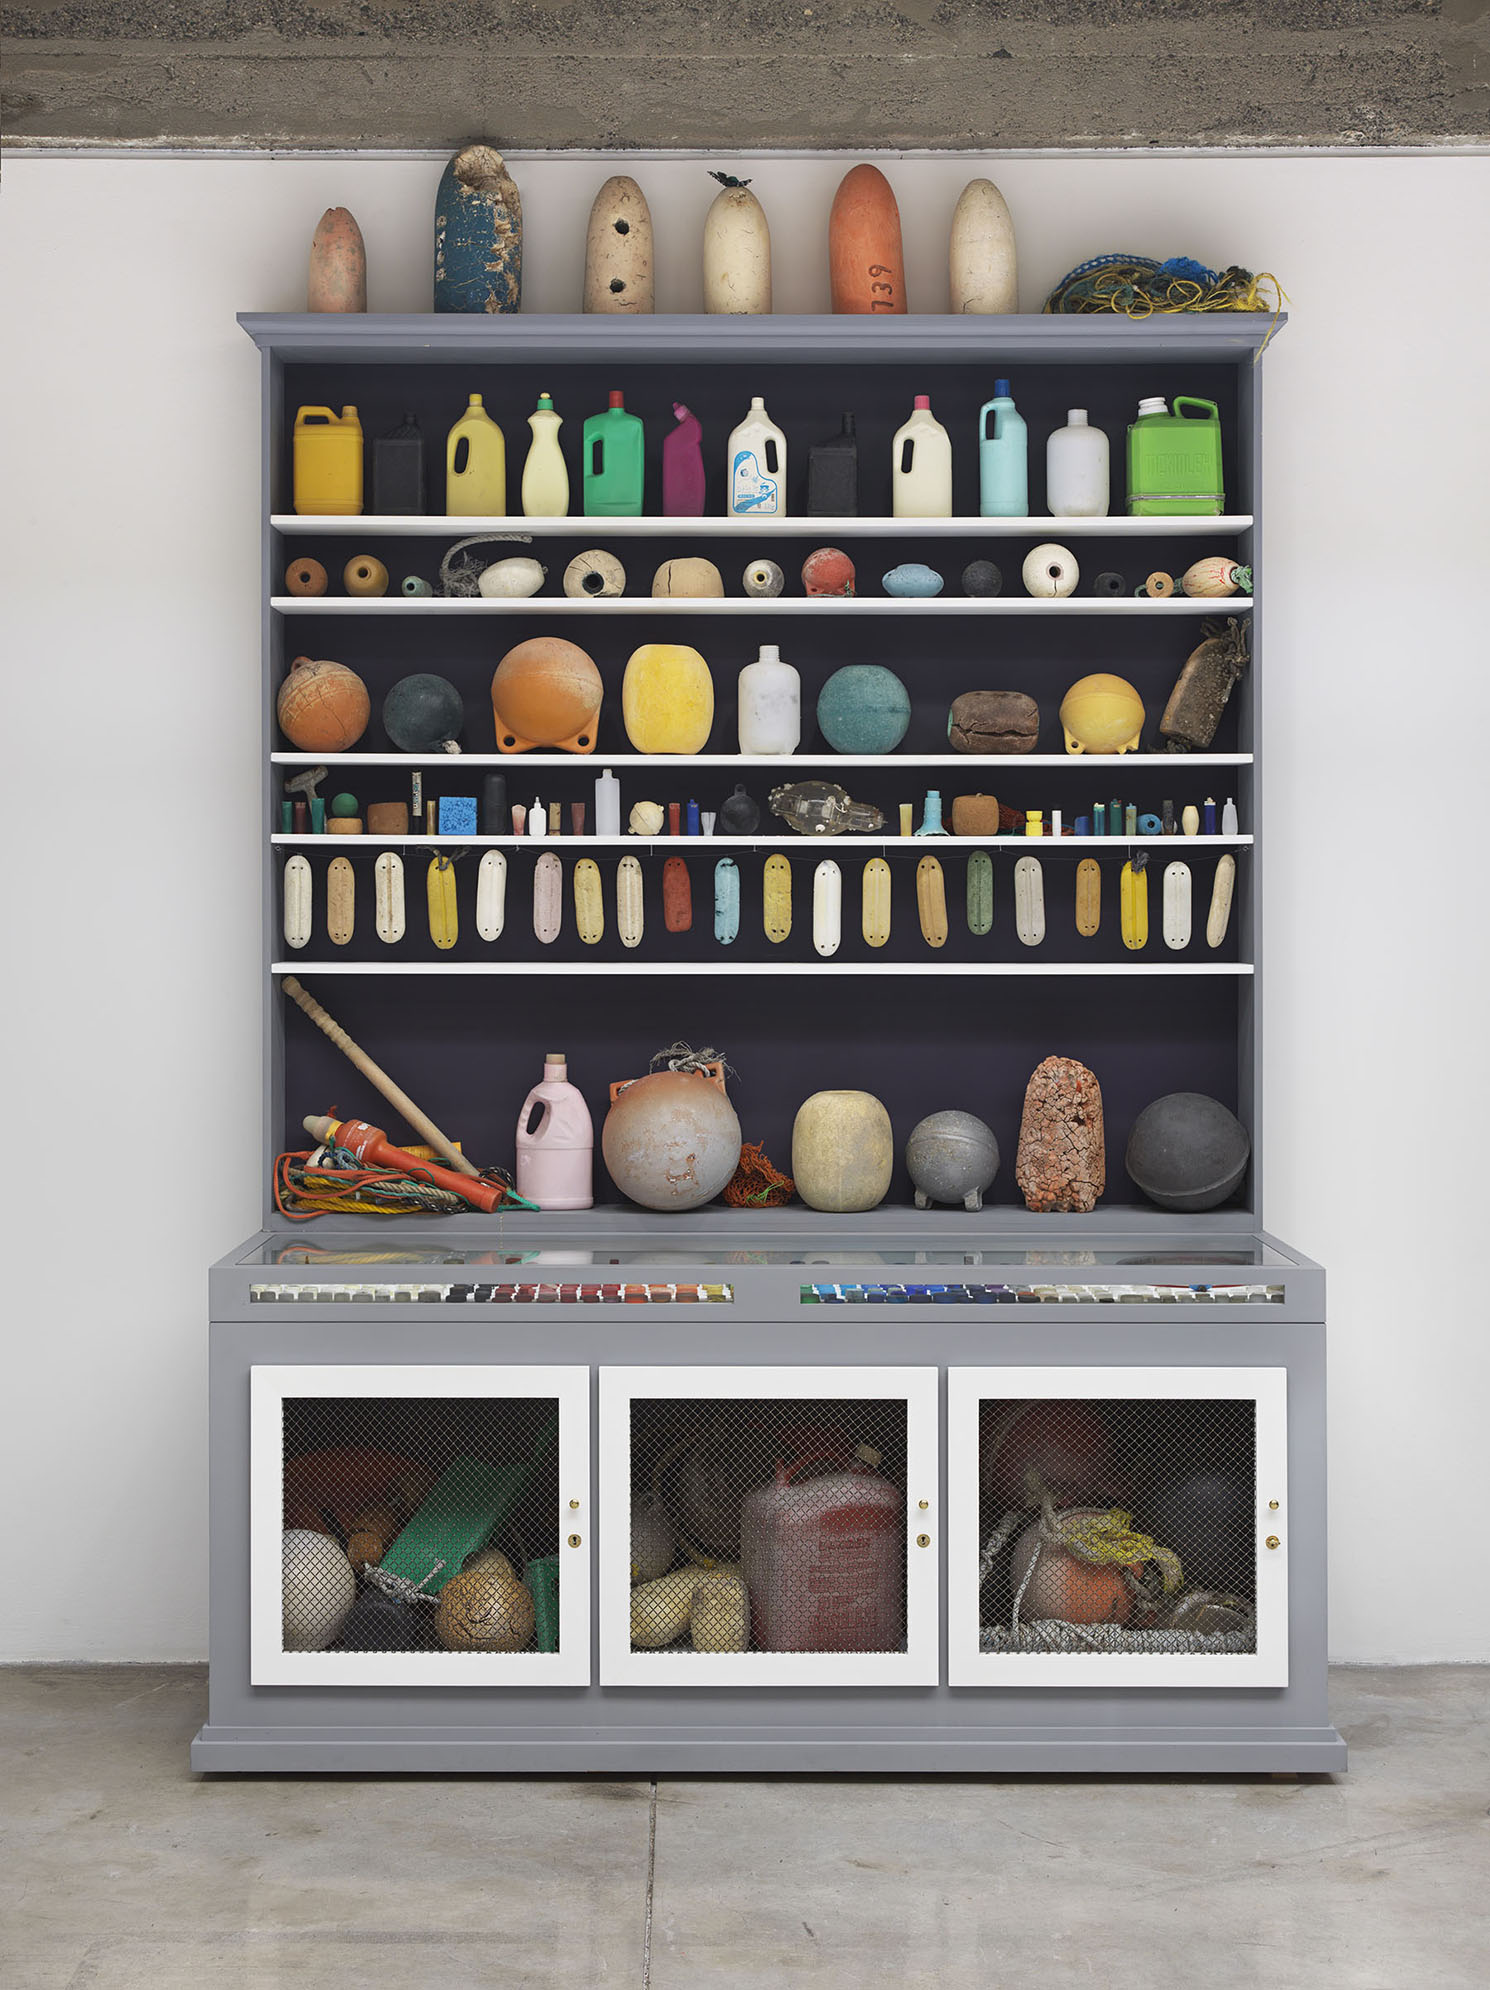 Mark Dion, <em>Cabinet of Marine Debris, </em>2014. Wood and metal cabinet, marine debris, plastic, rope. 113 x 84 x 32 inches. ©2014 Mark Dion. Margulies Collection, Miami. Courtesy of American Federation of Arts and The Bruce Museum.